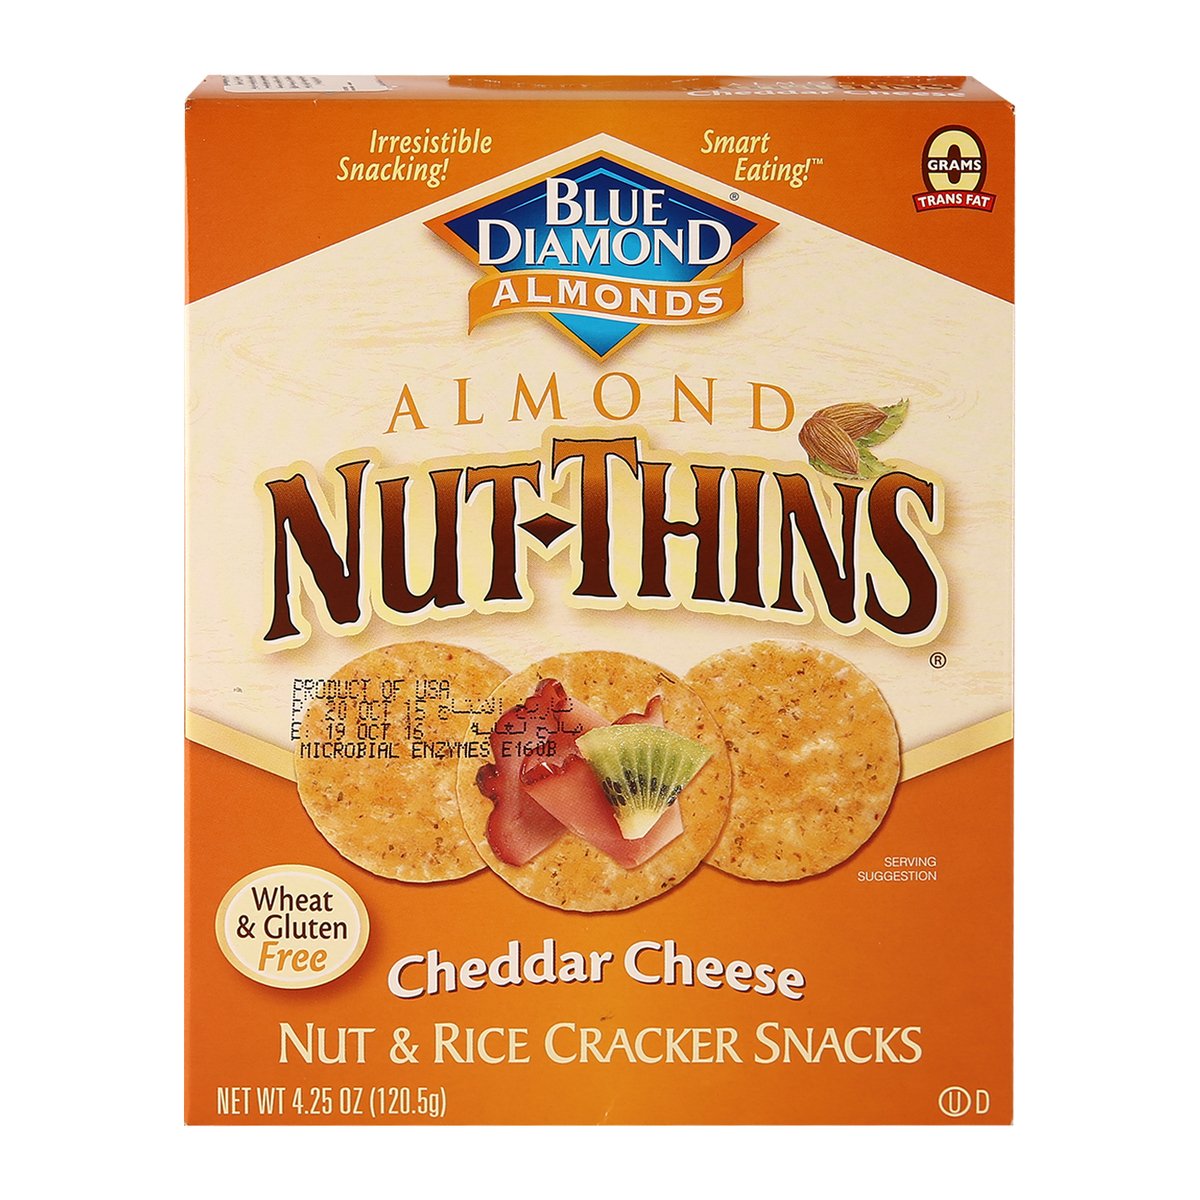 Blue Diamond Almond Nut-Thins Cheddar Cheese Nut and Rice Cracker Snacks 120 g